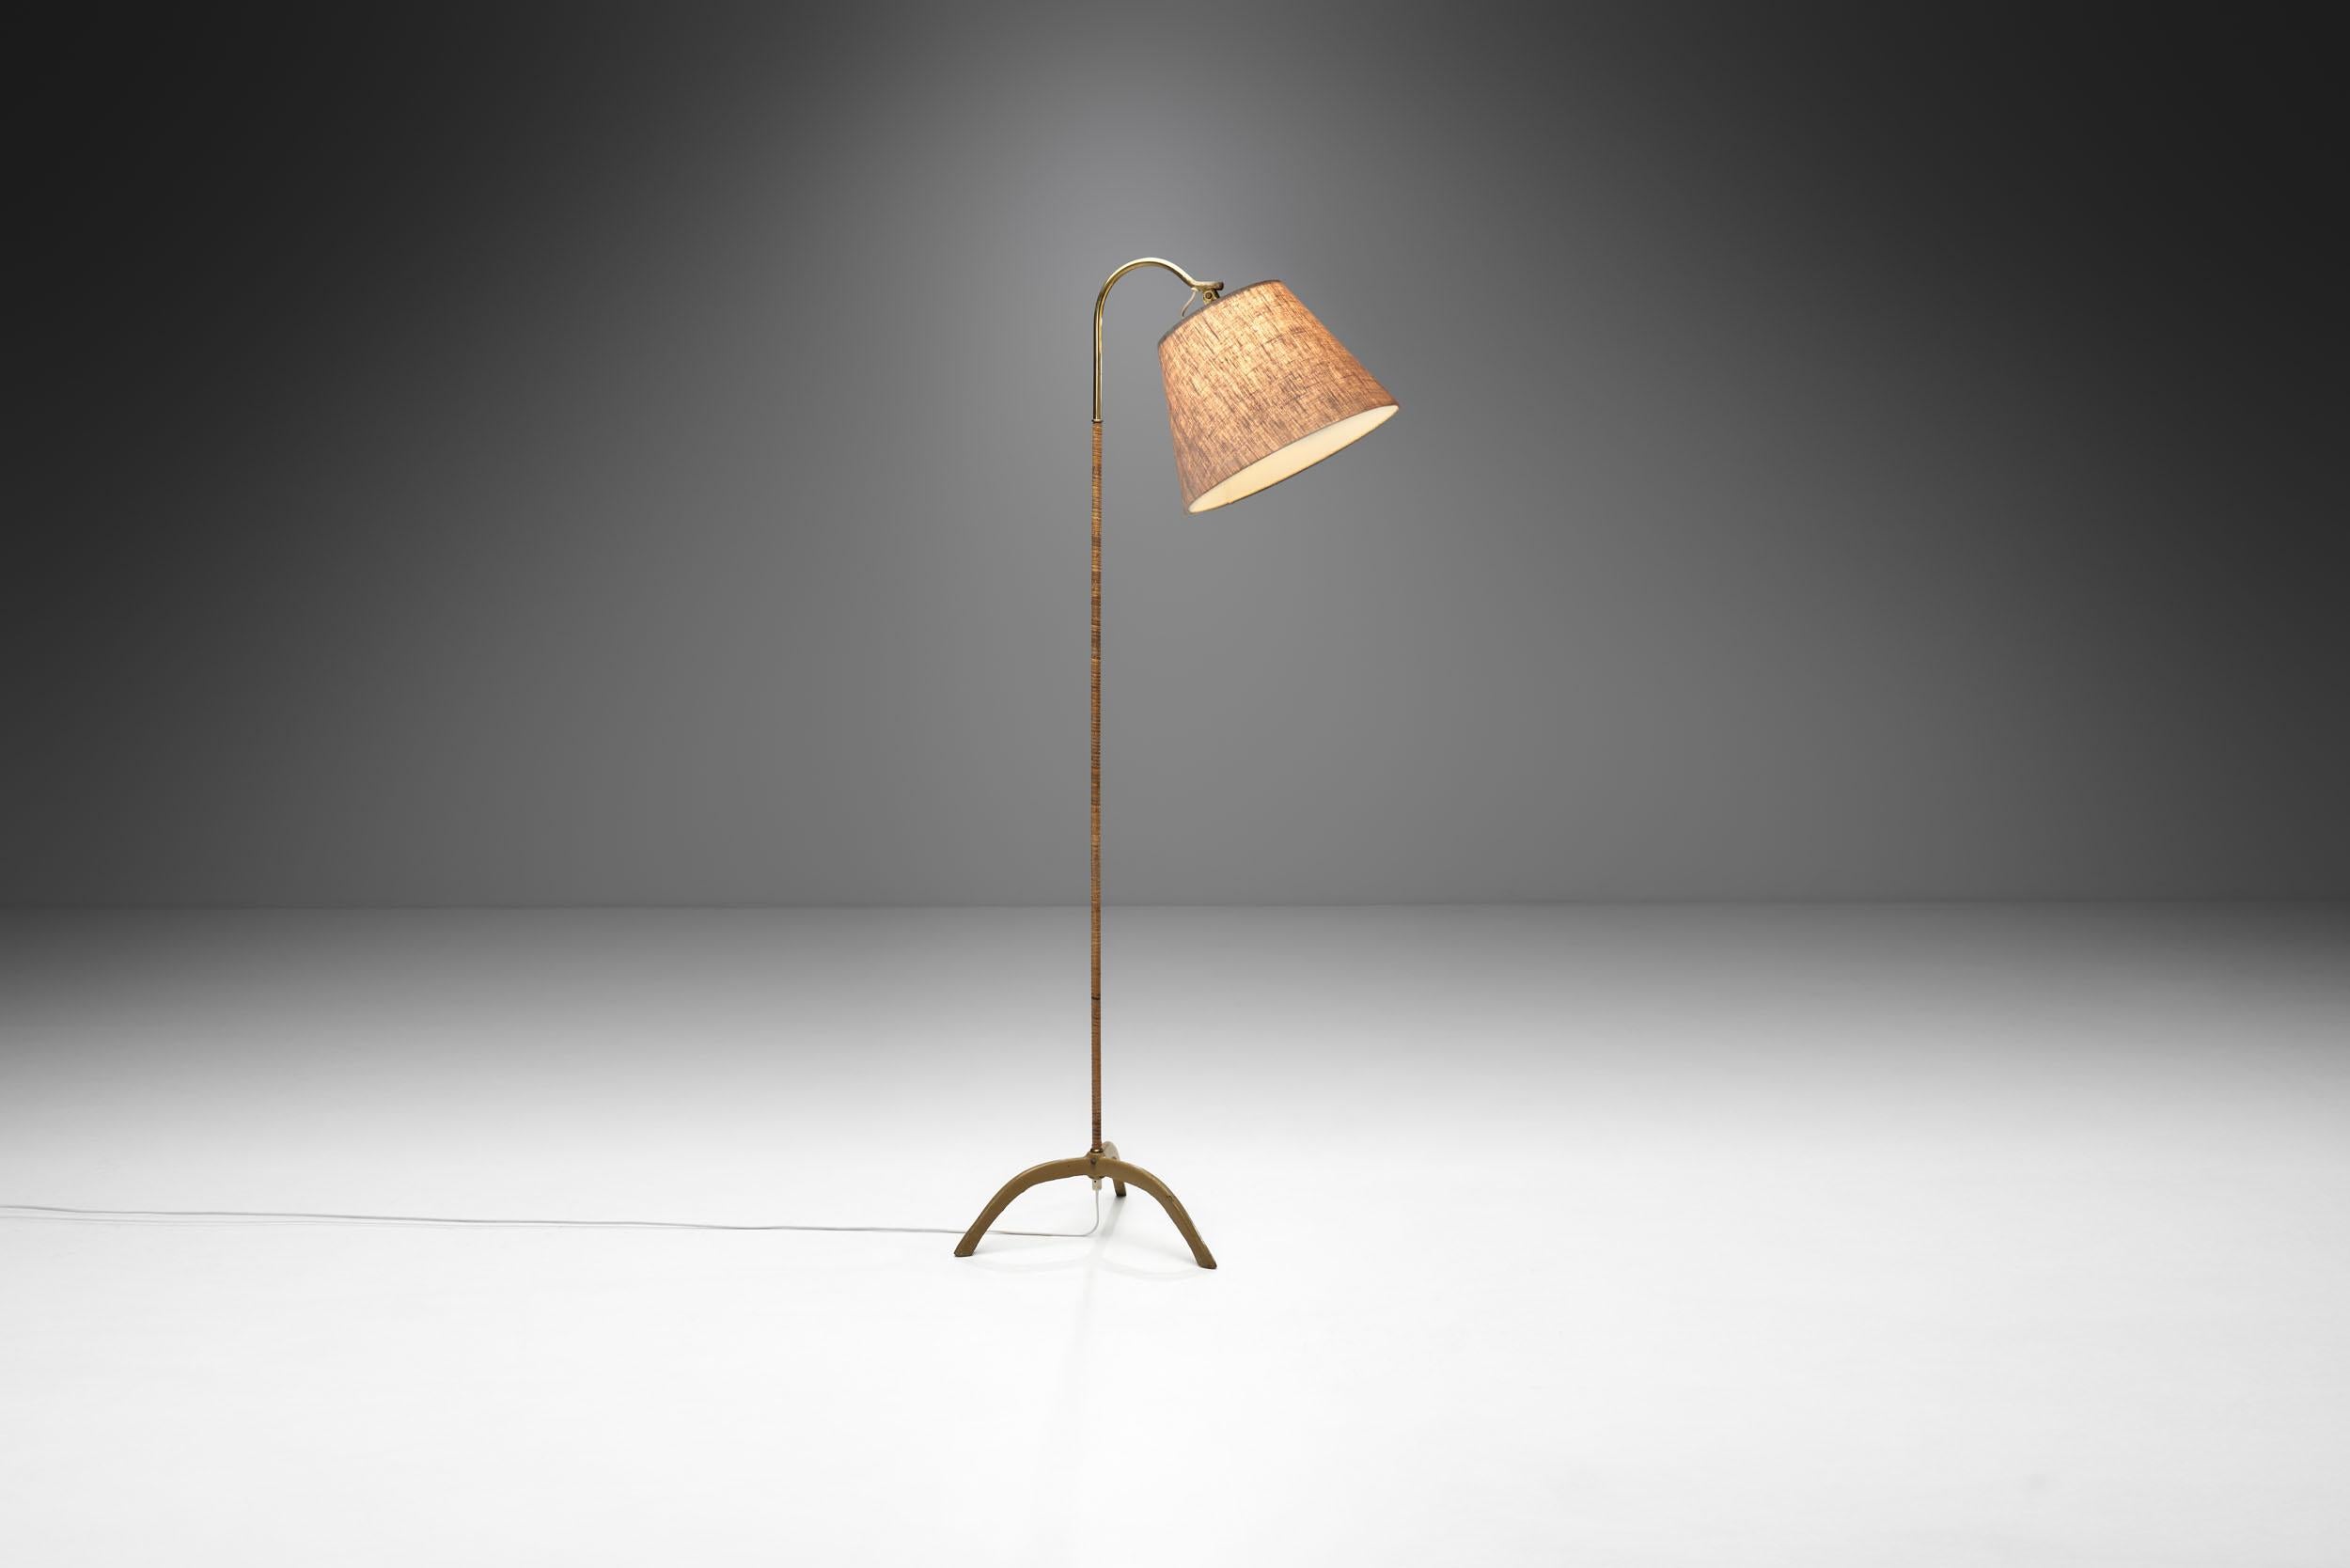 This rare model from the “man who illuminated Finland”, is a beautiful, Classic example of the Finnish’s designer’s aesthetic and craftsmanship. Natural materials are combined with metals and premium fabric to create a look that is modern, stylish,